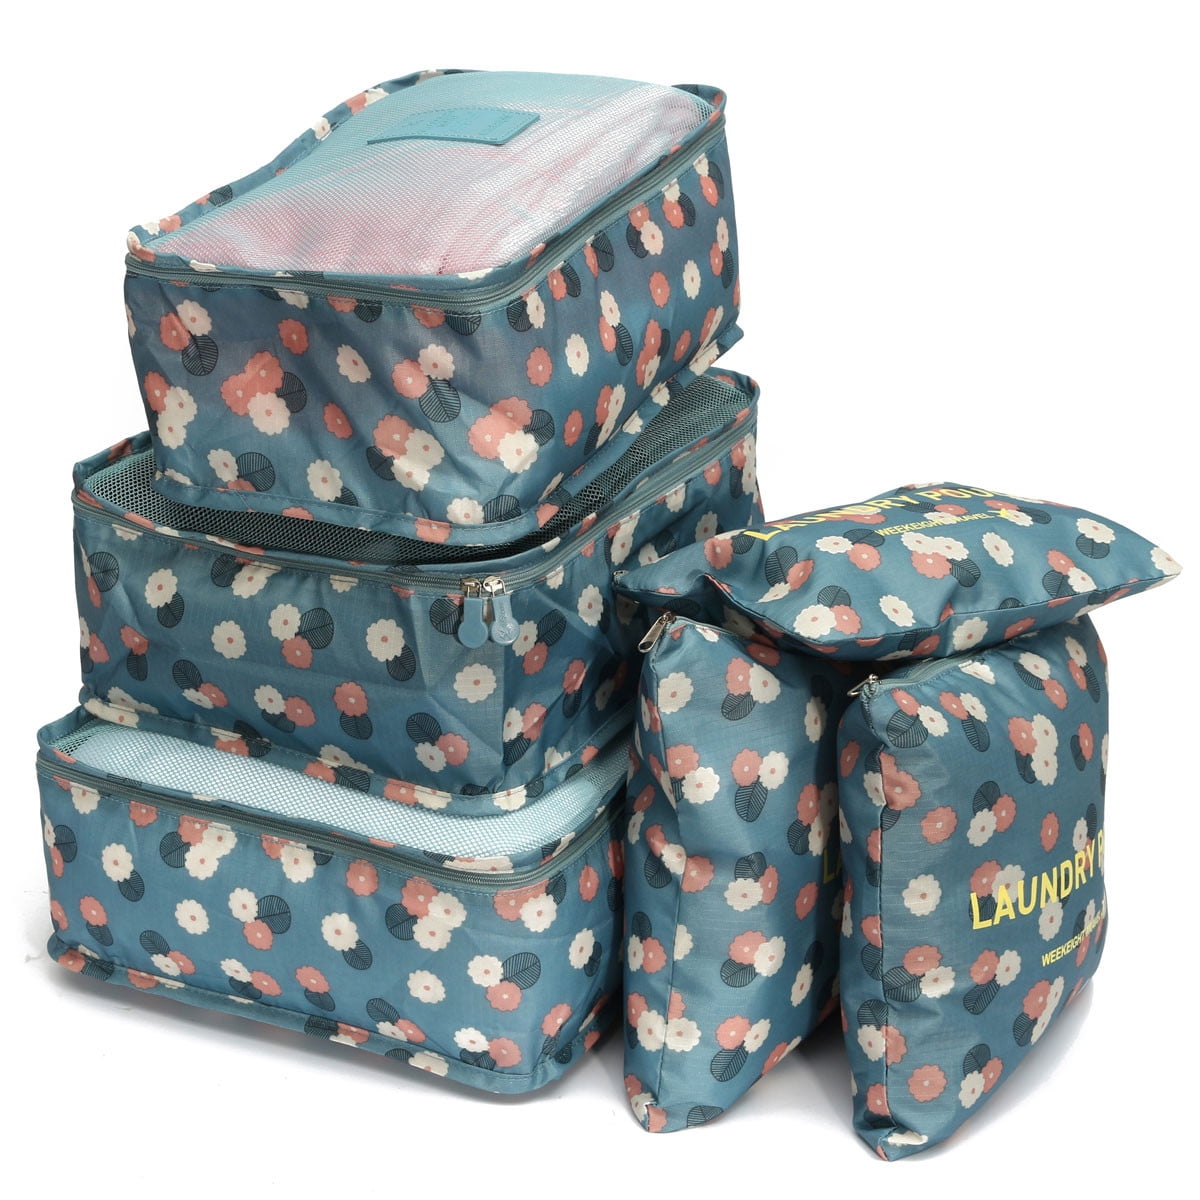 6pcs Durable Travel Storage Bags Luggage Organizer Pouchs Packing Cube Polyester 